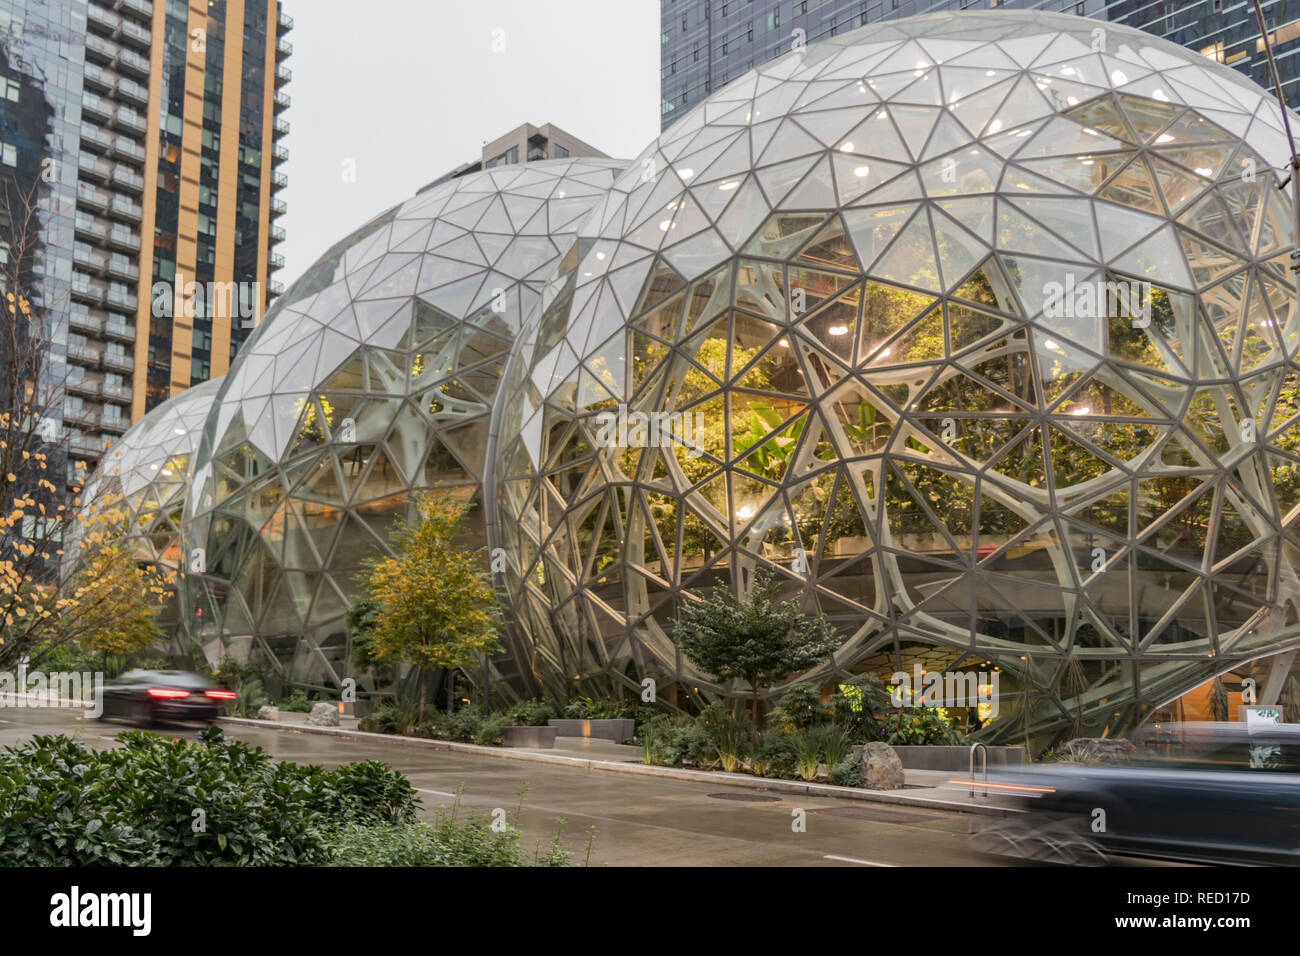 Seattle, Washington, USA - 27 October 2018. View of Amazon the Glass Spheres at its Seattle headquarters and Conference Center in Downtown Seattle. Stock Photo